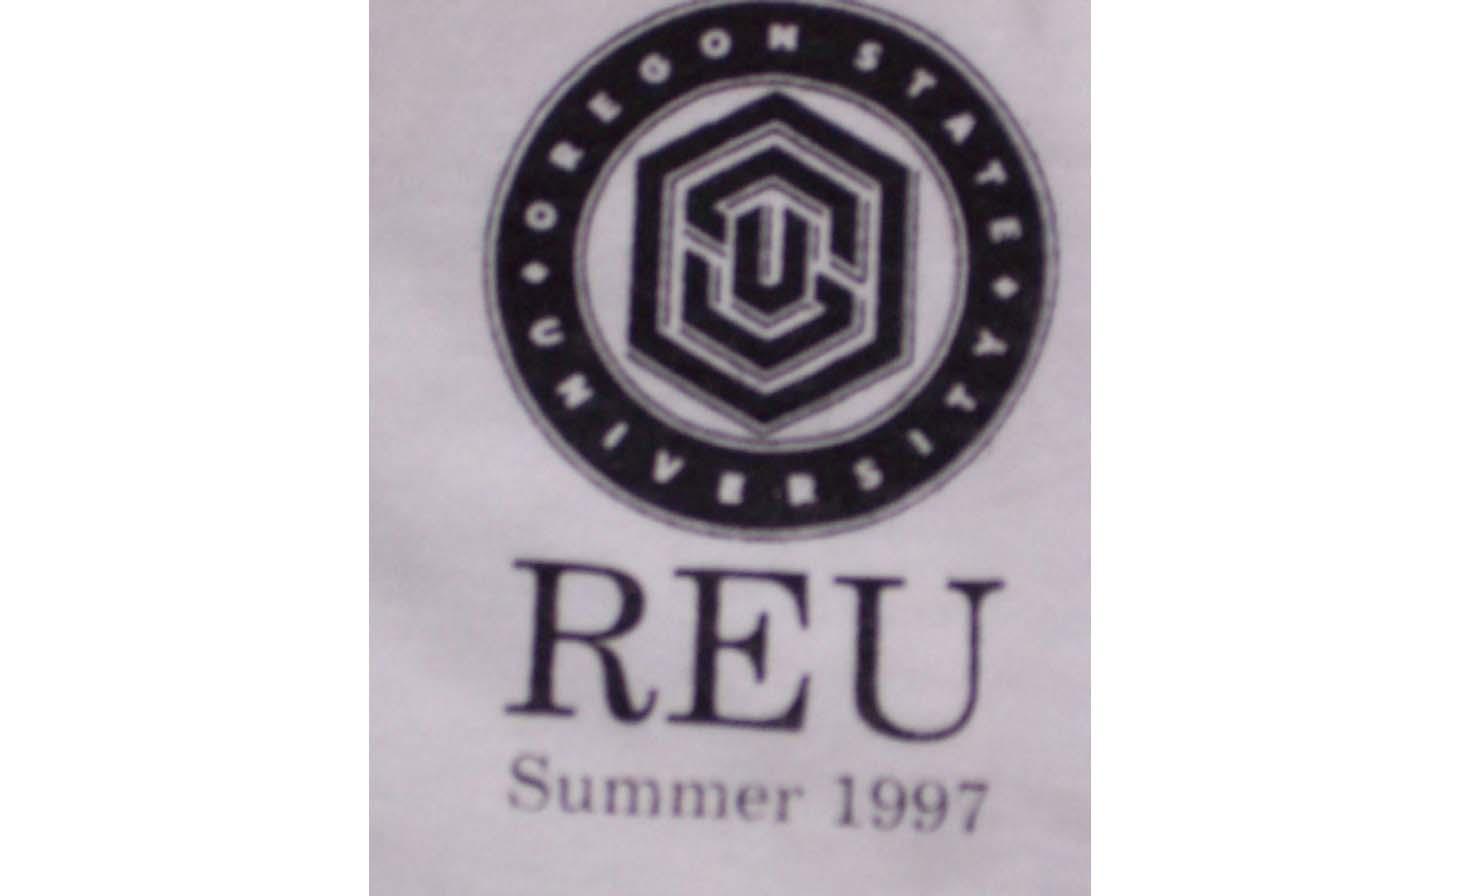 The front image of the OSU REU t shirt in 1997.